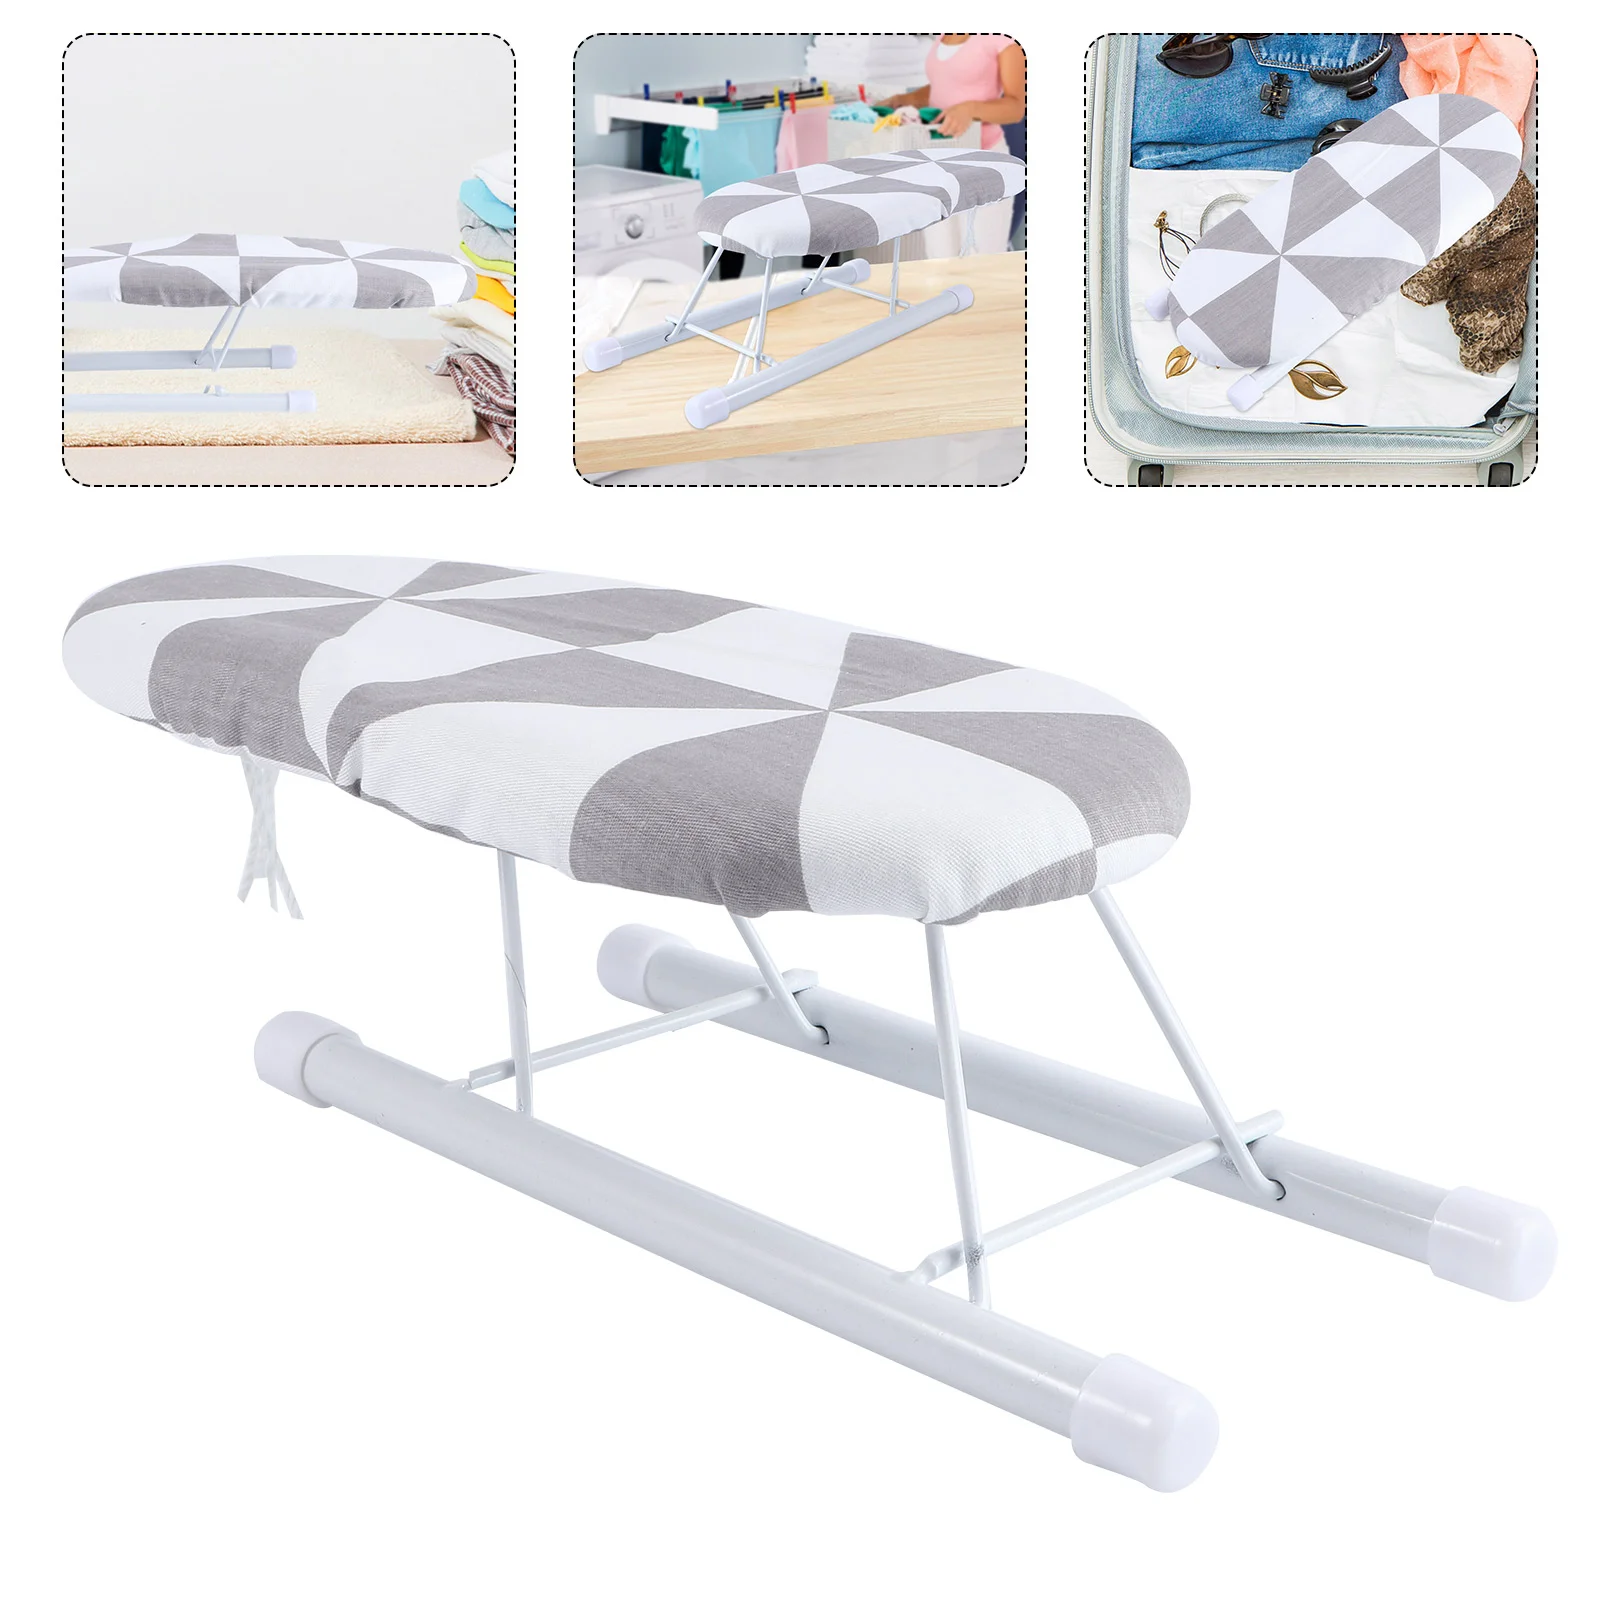 

Ironing Board Mini Sleeve Boards Rack Small Tabletop Space Saving Gifts Housewarming Cover Cotton Legs Racks Clothes Folding